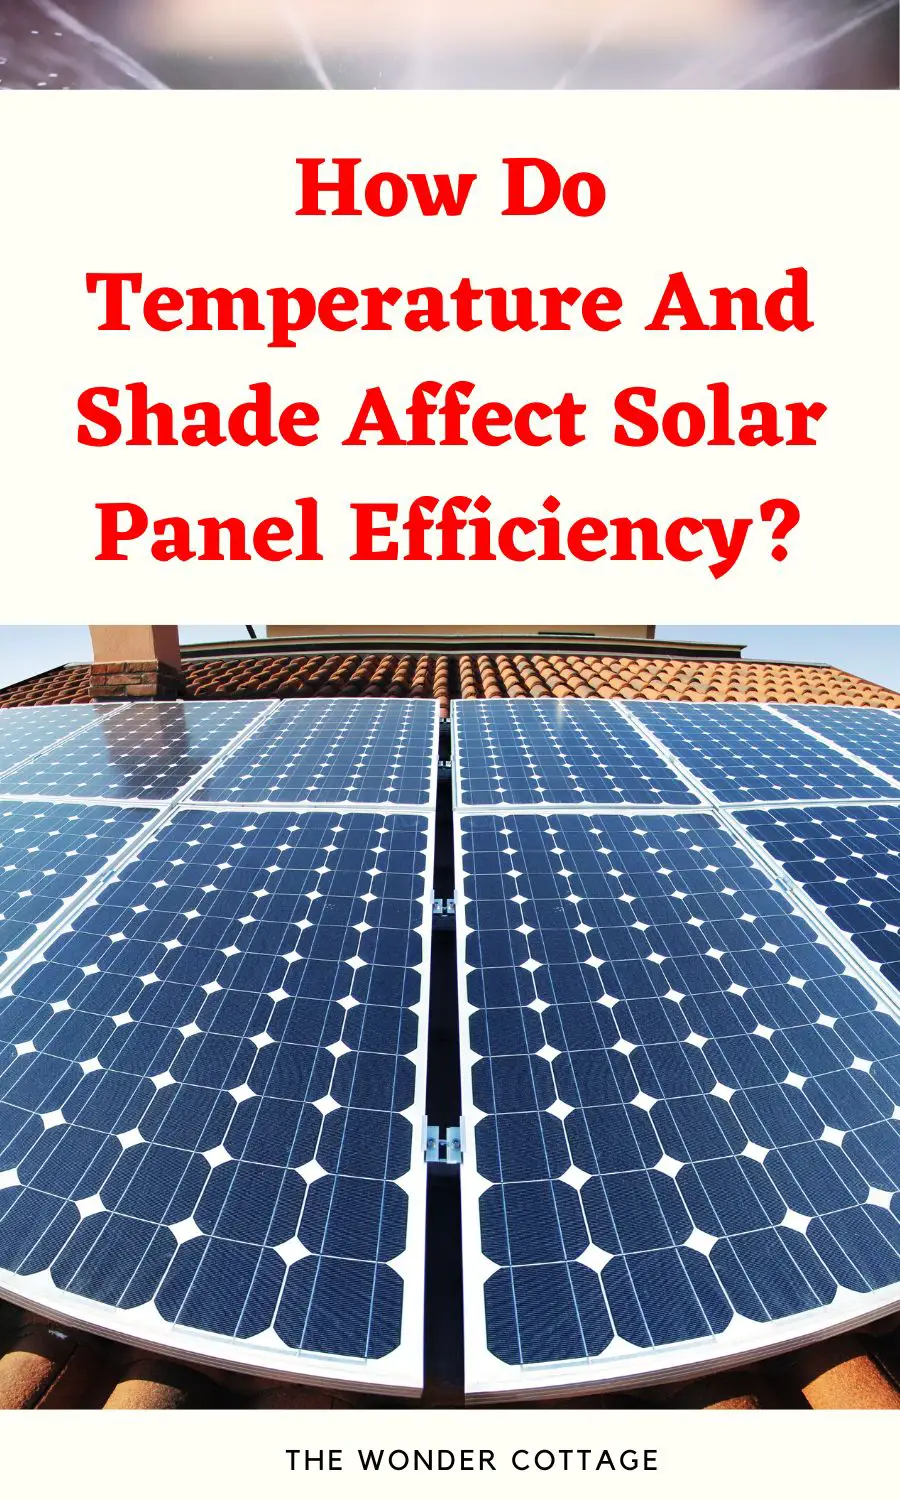 How Do Temperature And Shade Affect Solar Panel Efficiency?